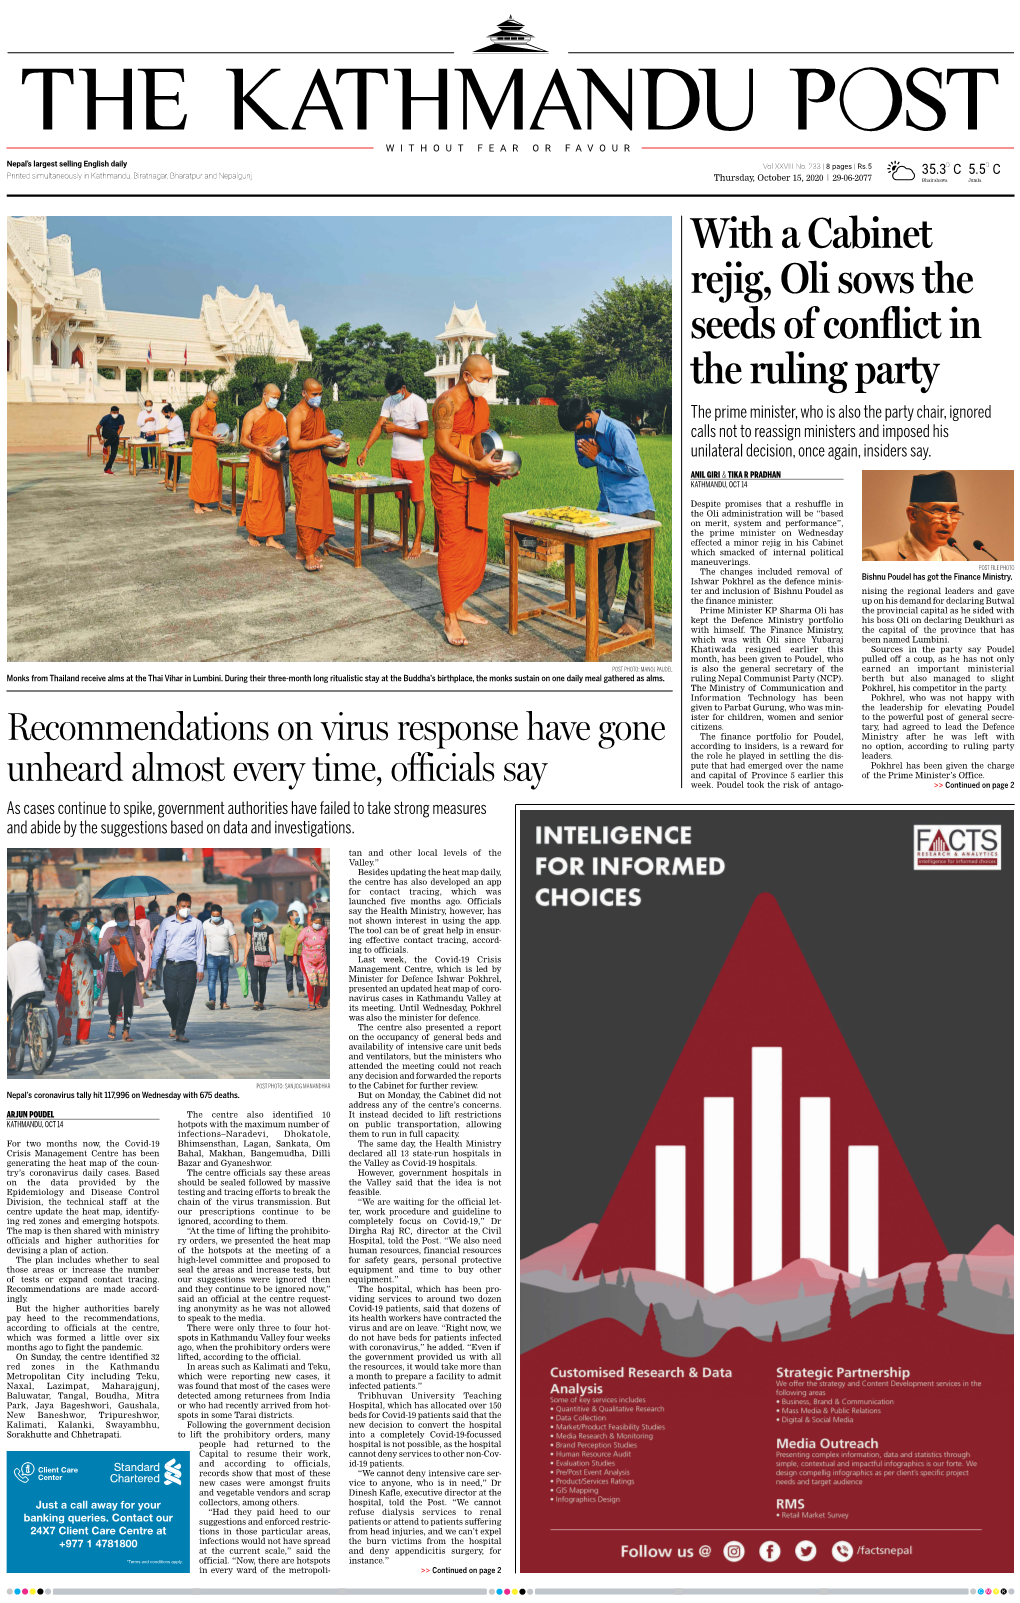 With a Cabinet Rejig, Oli Sows the Seeds of Conflict in the Ruling Party